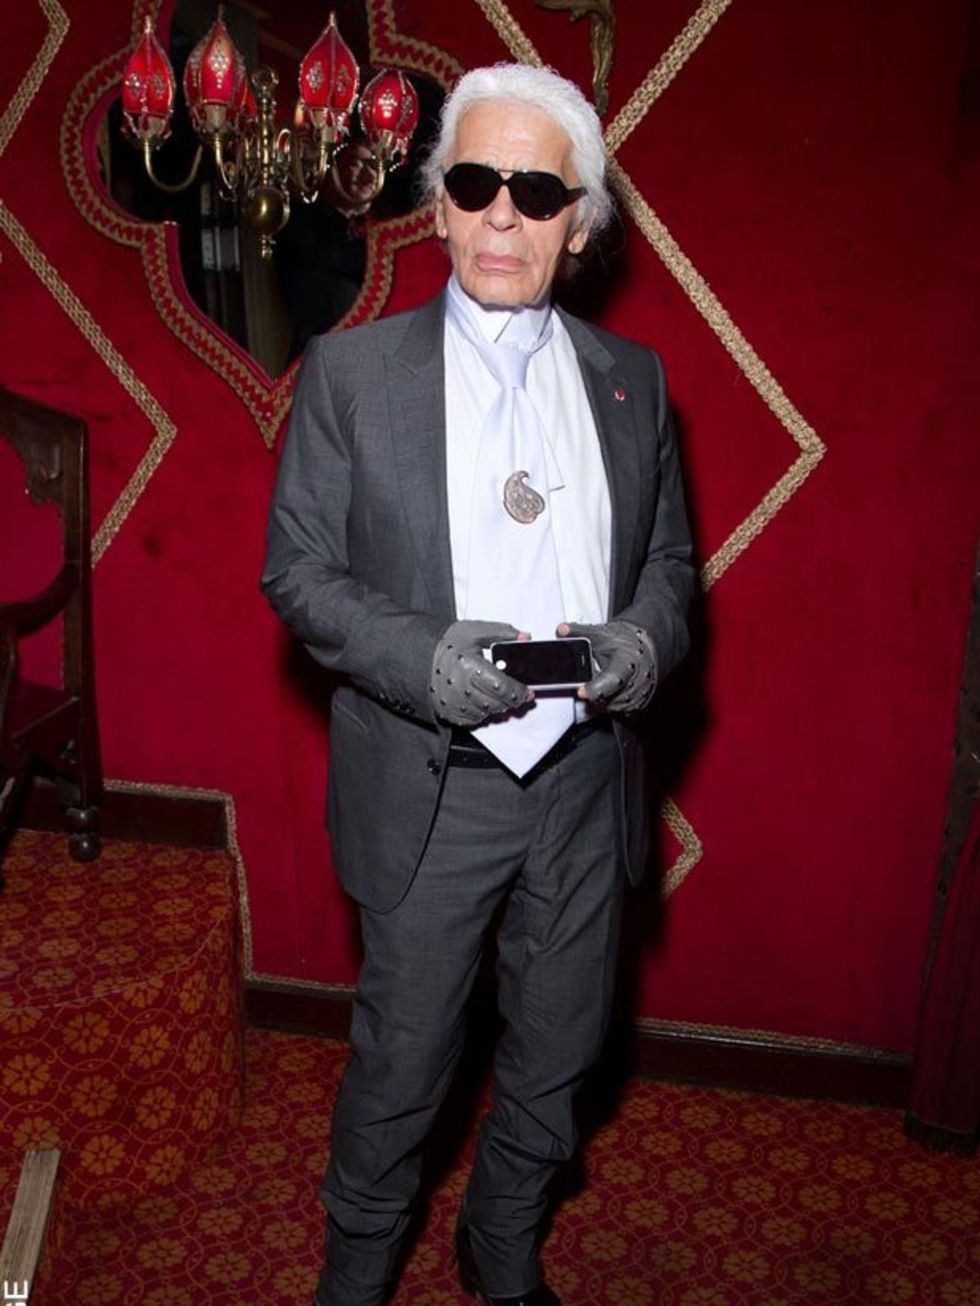 <p><a href="http://www.elleuk.com/content/search?SearchText=karl+lagerfeld&amp;SearchButton=Search">Karl Lagerfeld </a>at the Irreverent Dinner hosted by <a href="http://www.elleuk.com/content/search?SearchText=Carine+Roitfeld&amp;SearchButton=Search">Car